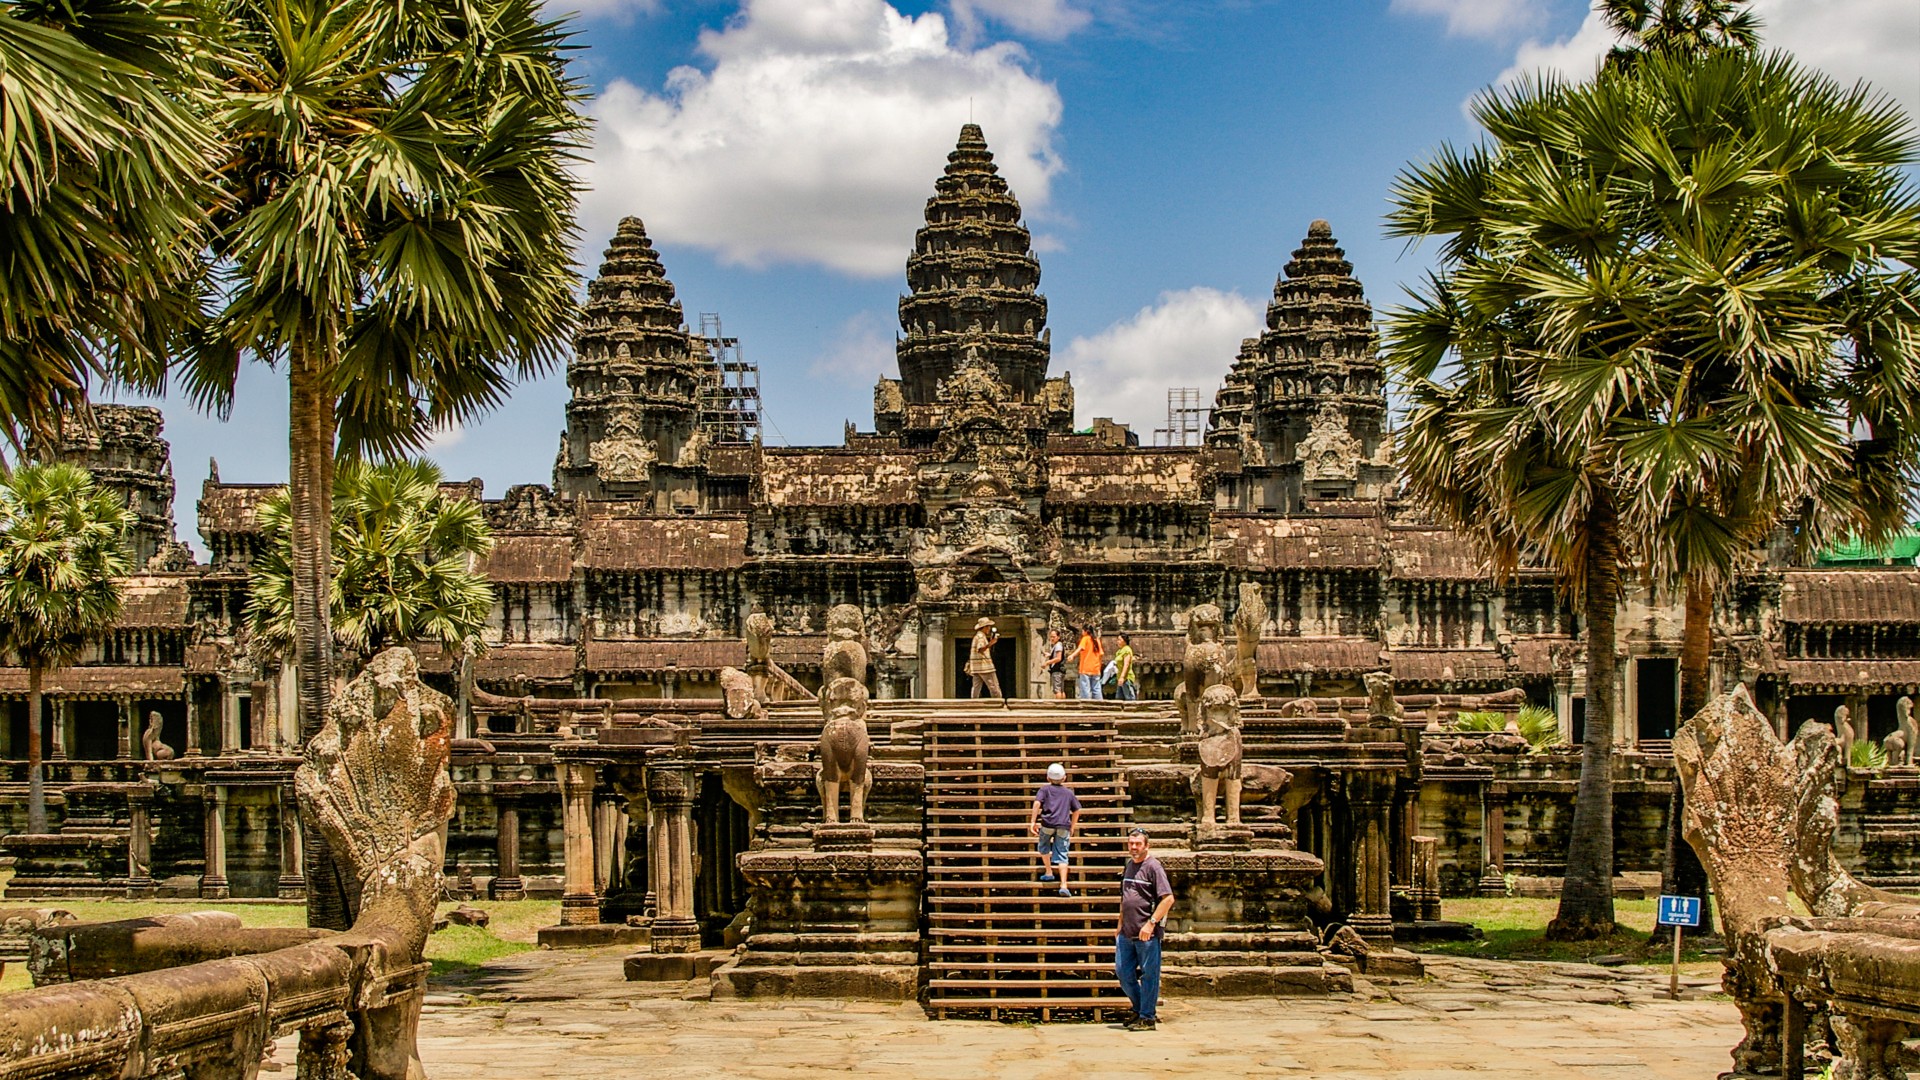 Angkor Wat in Cambodia is the largest religious monument in the world and a World heritage listed complex.